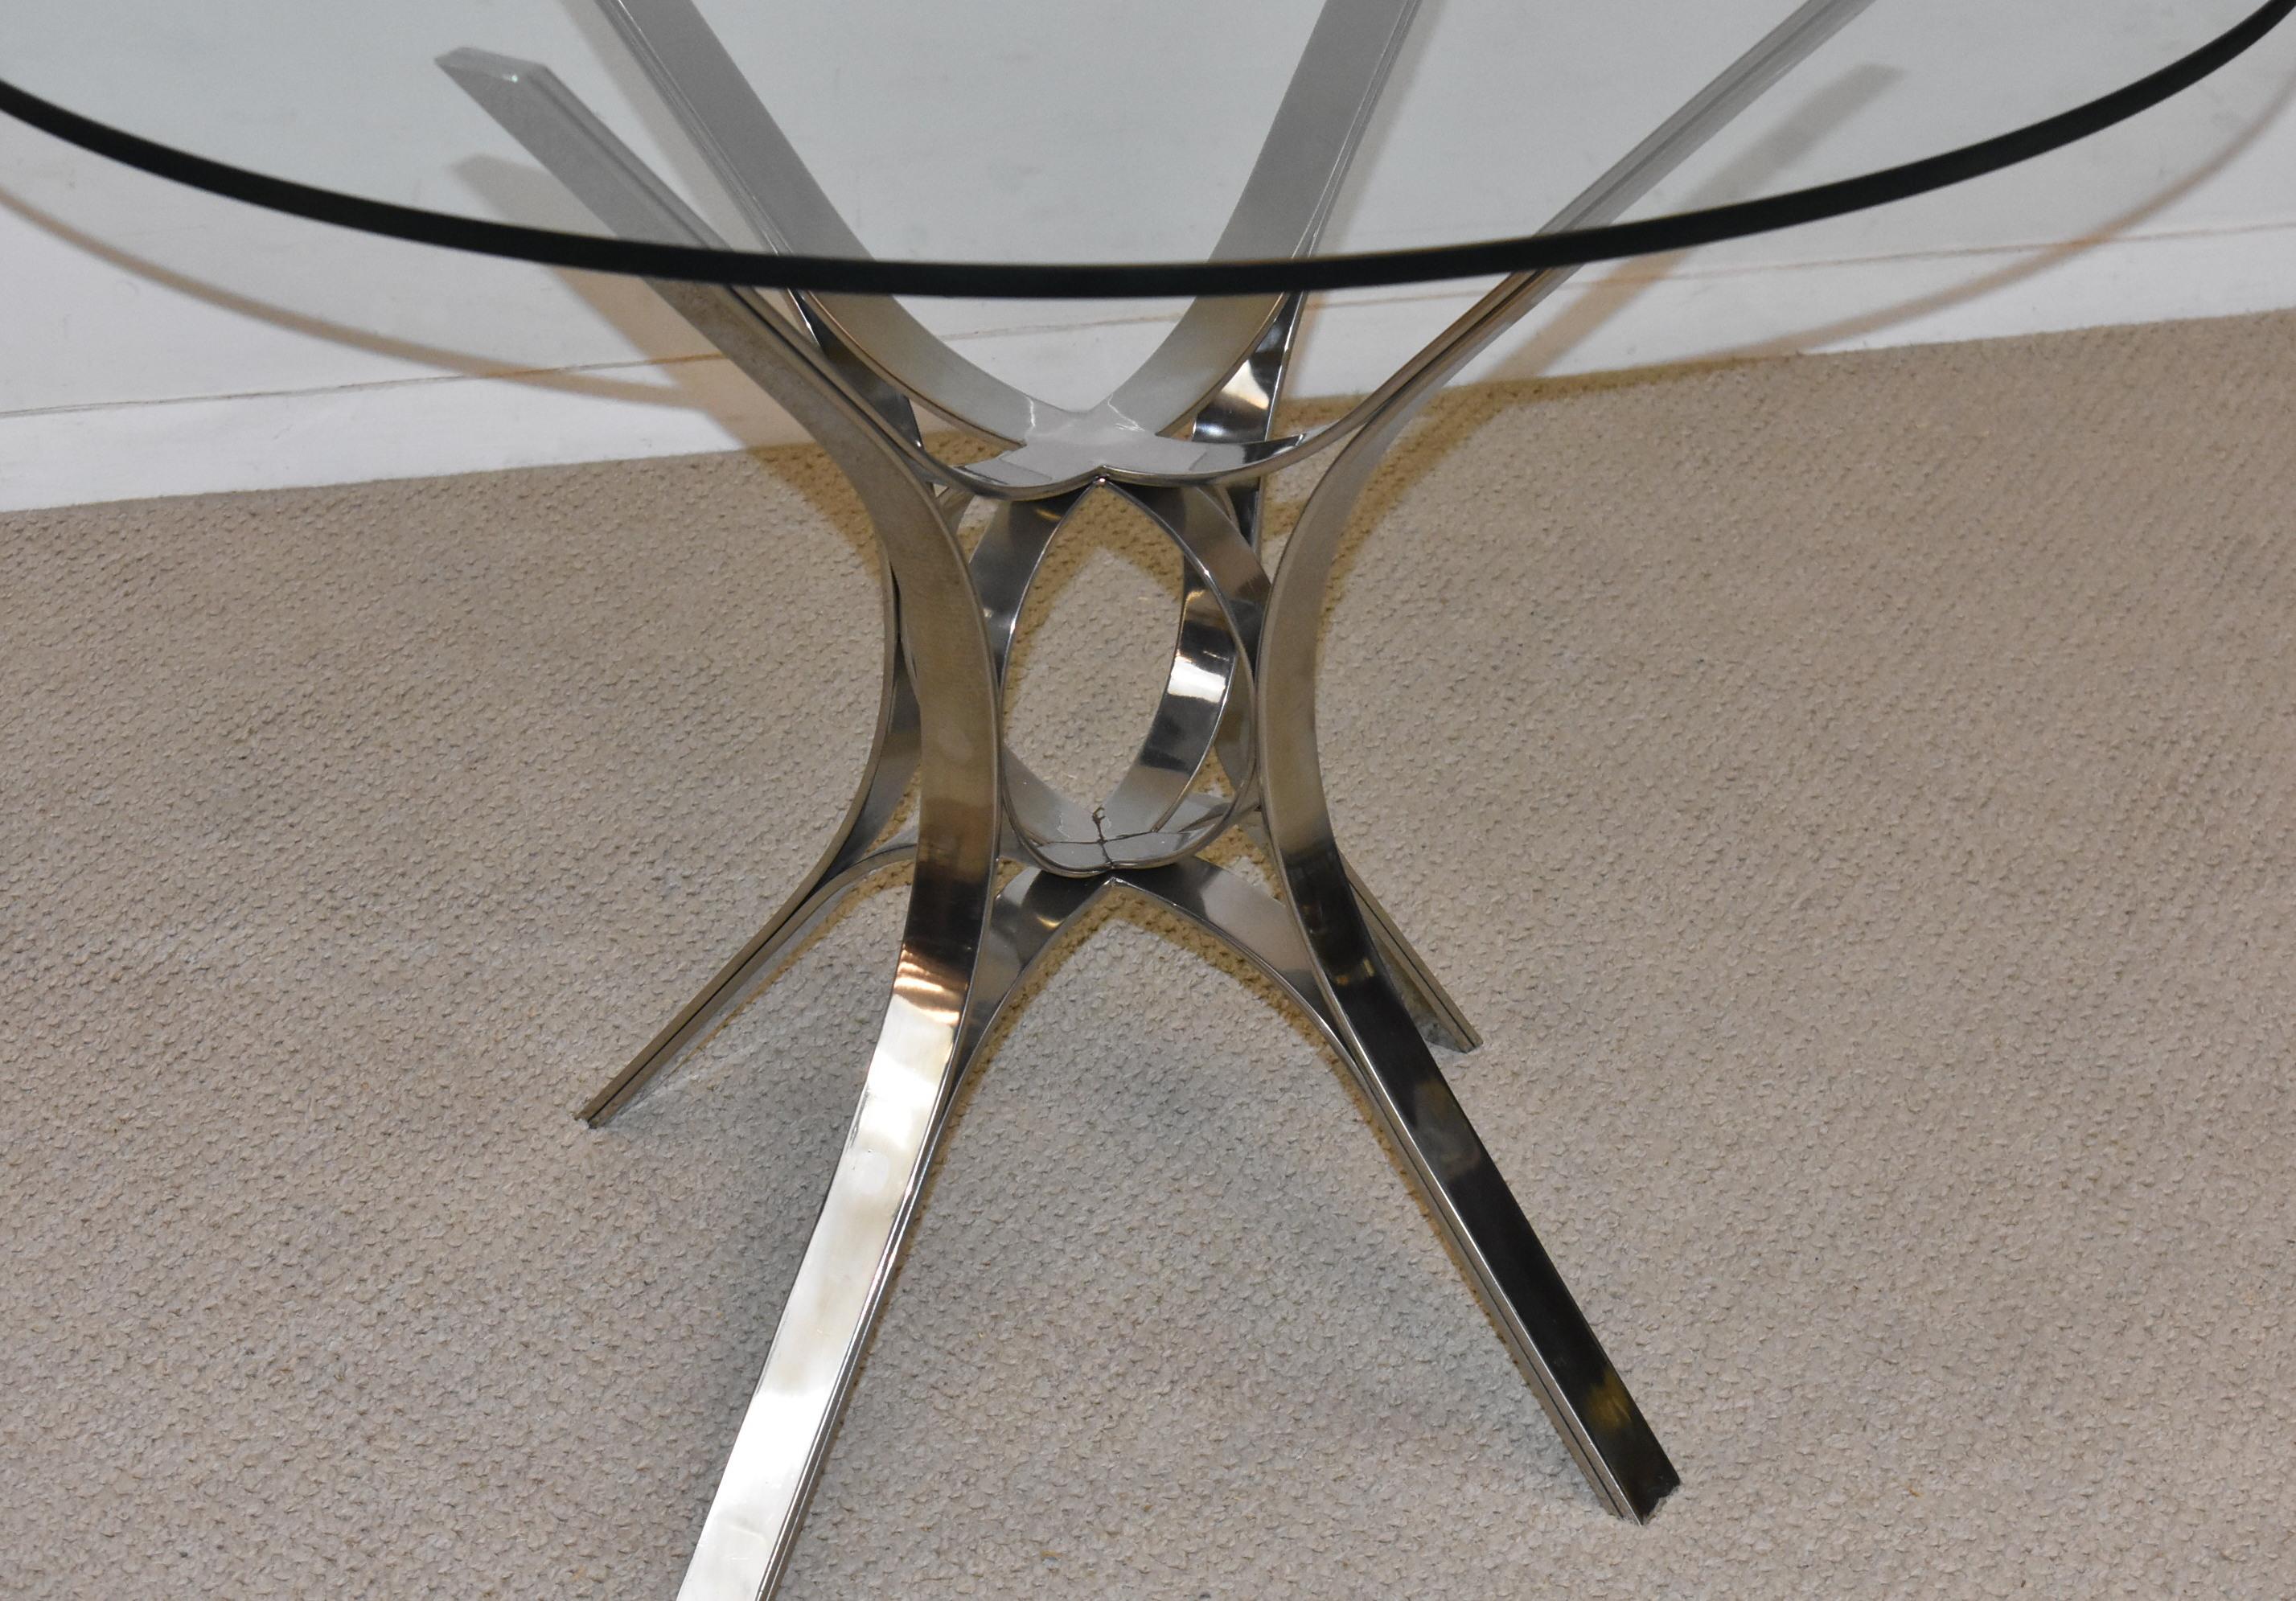 Flat bar Modernist sculptural chrome and glass round table by Roger Sprunger for Dunbar. Glass is 0.5